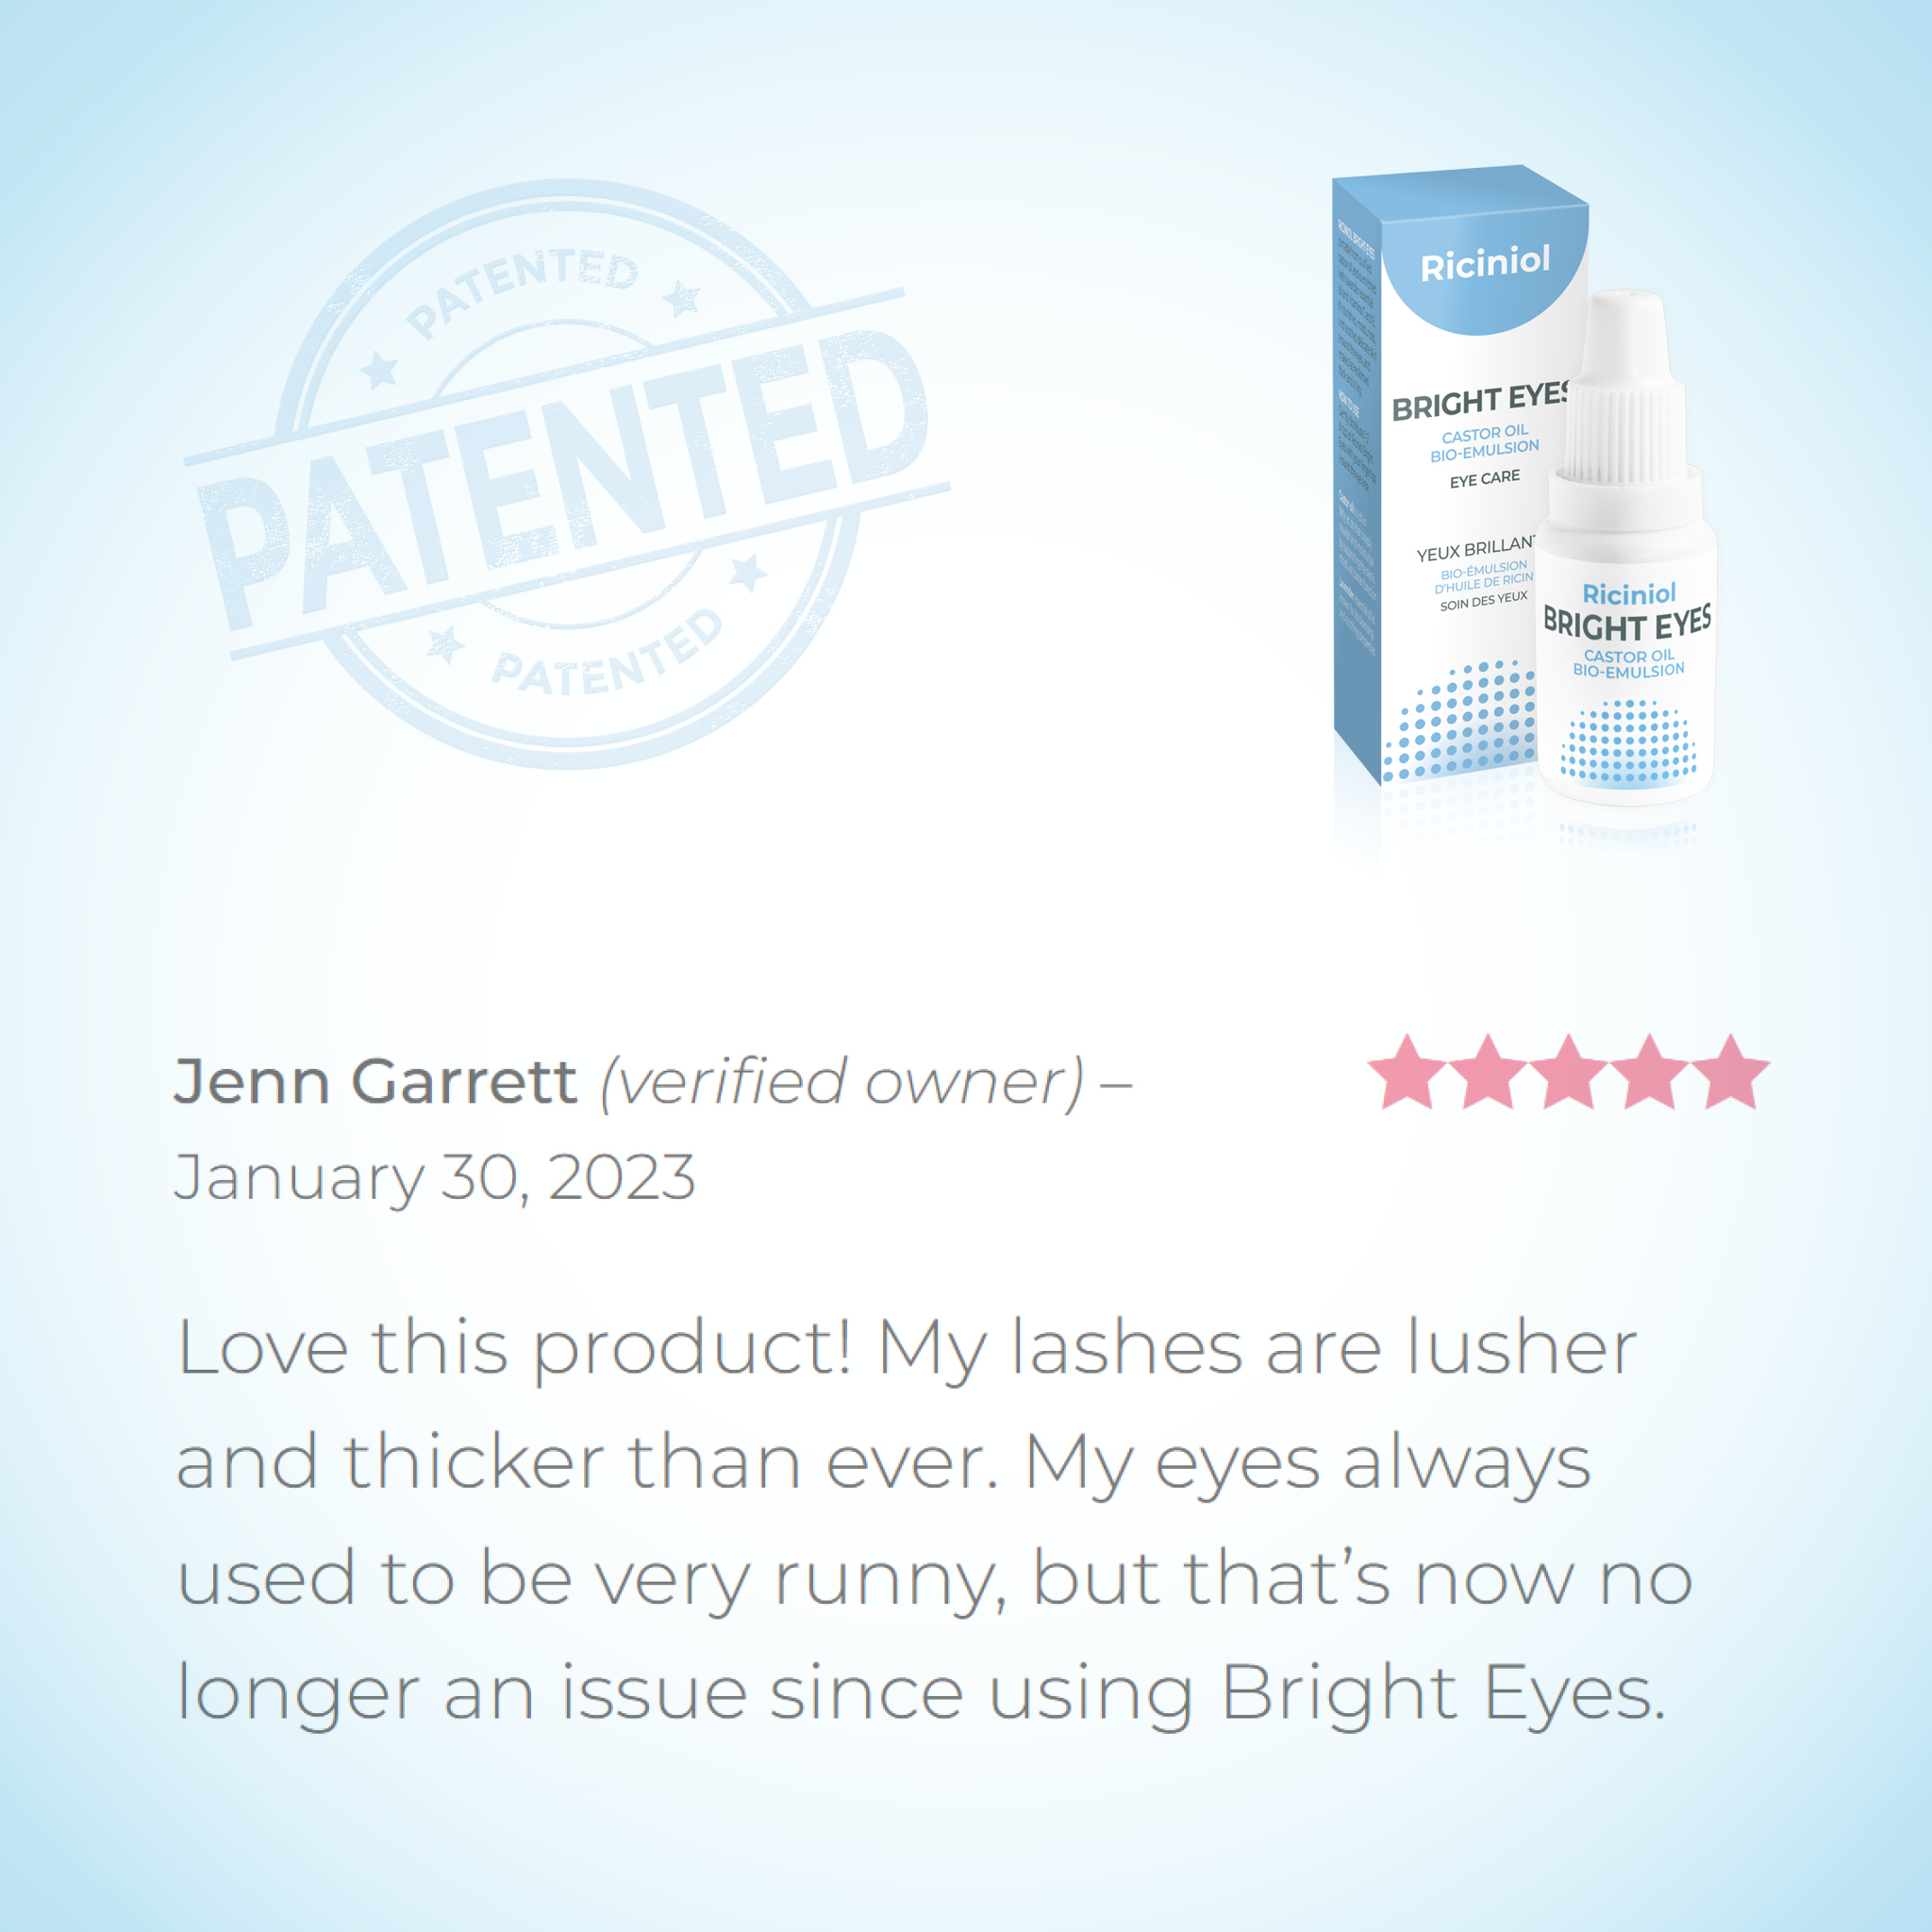 Riciniol Bright Eyes Love this product! My lashes are lusher and thicker than ever. My eyes always used to be very runny, but that’s now no longer an issue since using Bright Eyes.